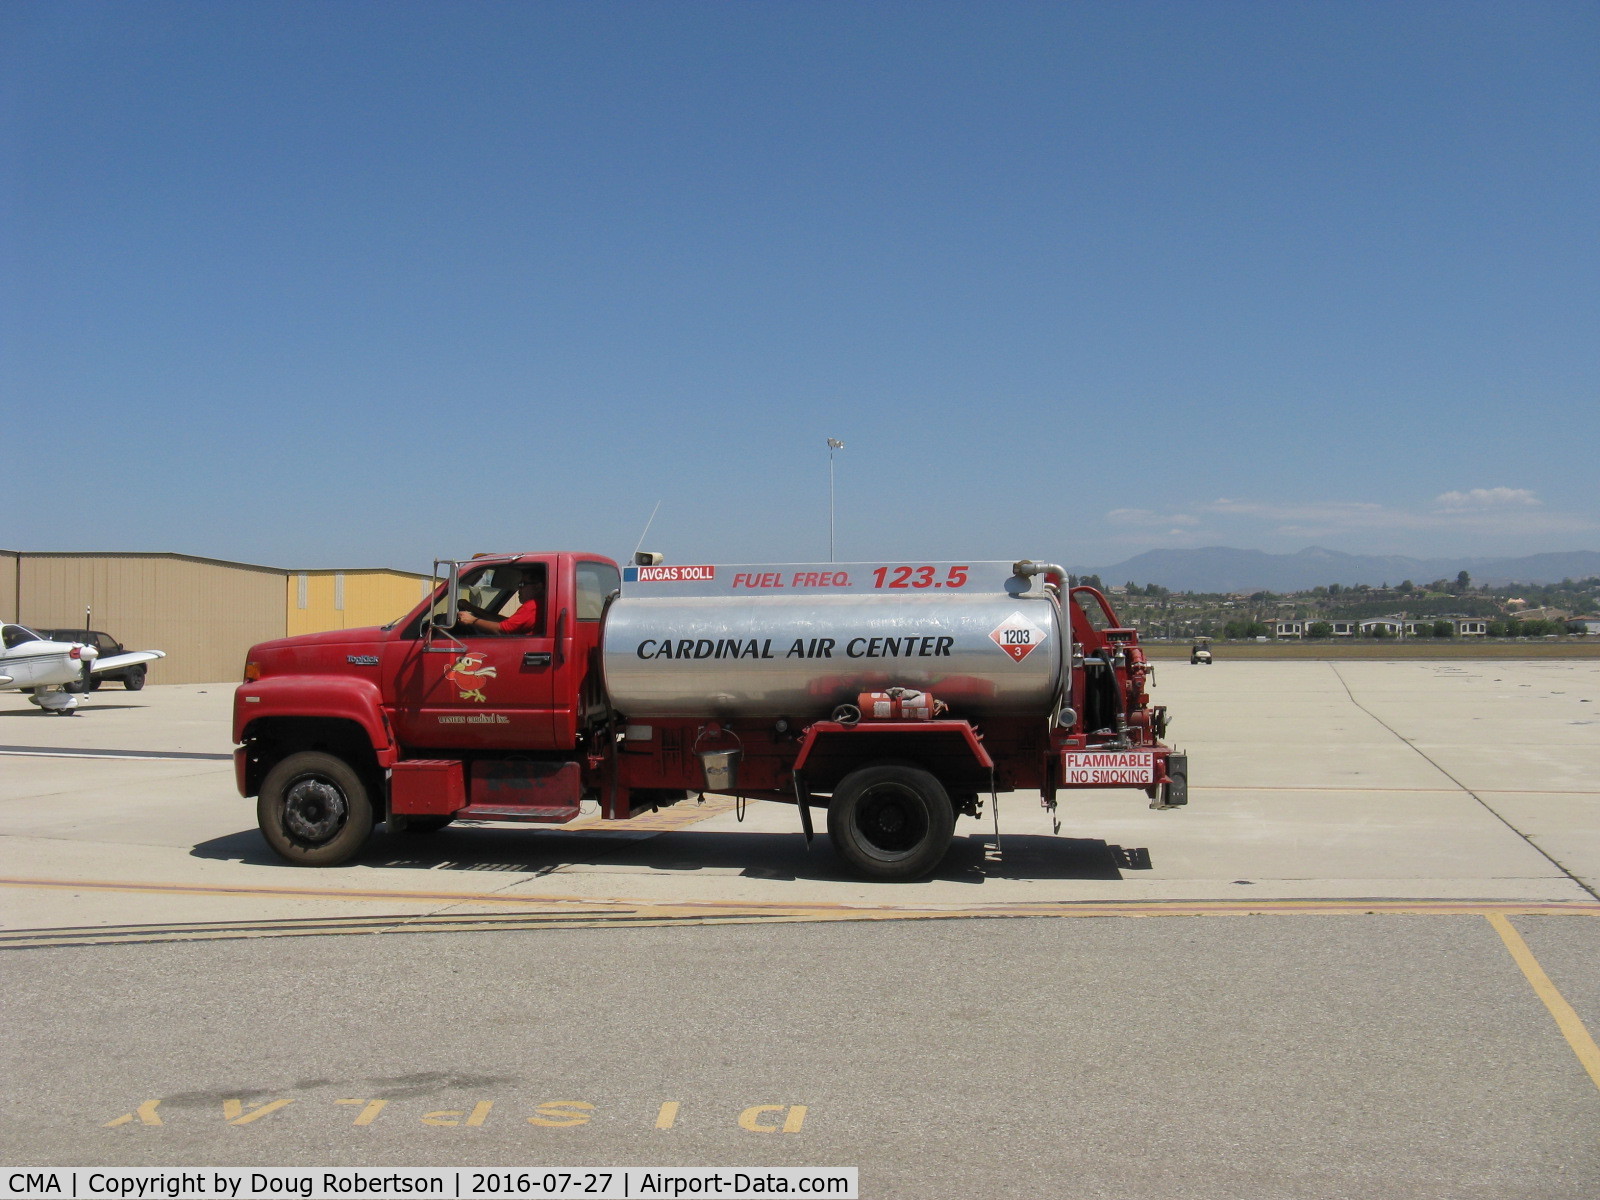 Camarillo Airport (CMA) - Roving Cardinal Air Center 100LL refueling truck. SUN AIR JETS offers 24/7 service for Jet-A and 100LL. 100LL, Jet-A, Jet-A-Prist variously available- multiple FBOs 7 days. Self-serve 100LL near Control Tower.  